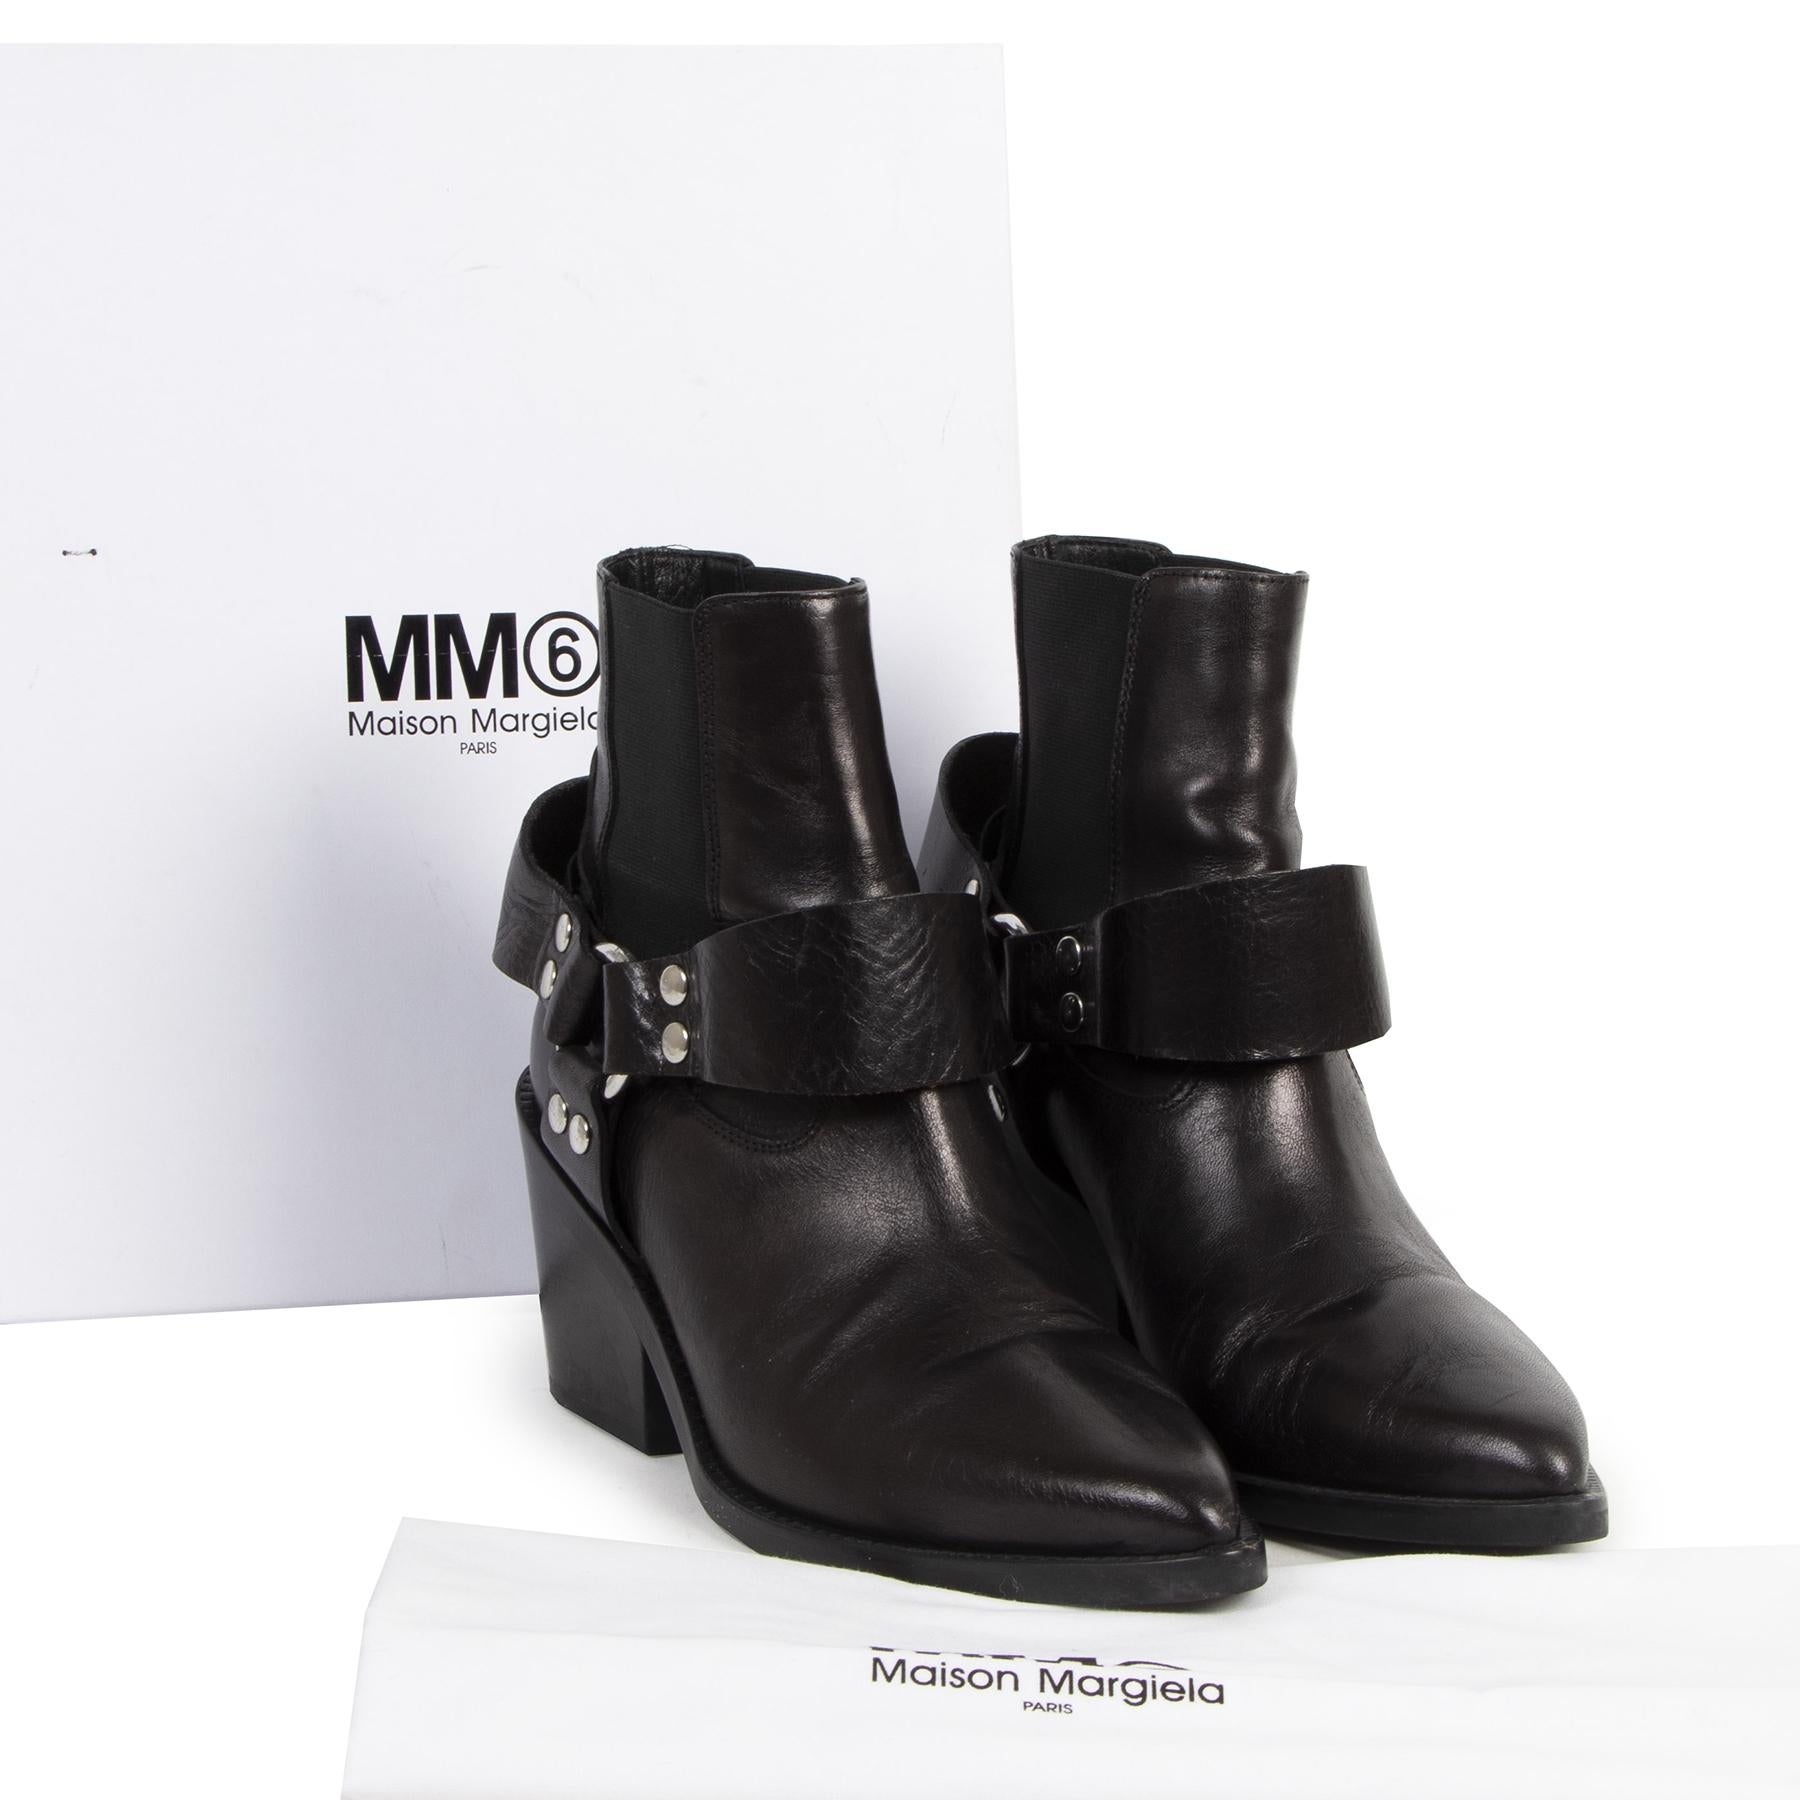 Very good preloved condition

Maison Margiela Black Leather Ankle Boots - Size 38

You can never go wrong with a pair of black boots and these chic and timeless Maison Margiela ankle boots are perfect. They are crafted in black leather and feature a